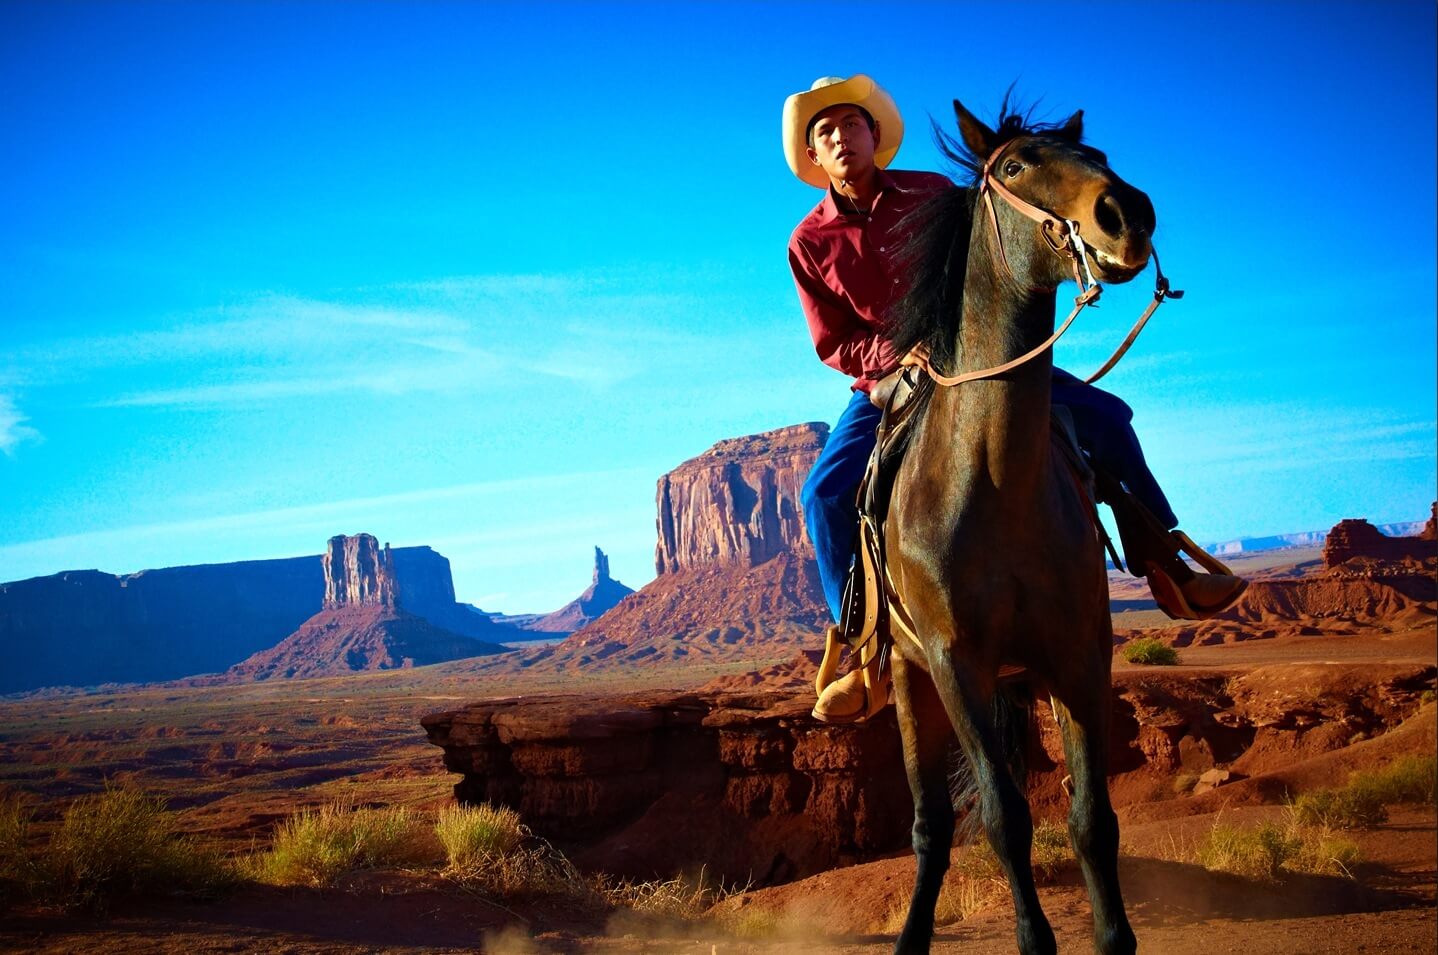 A Navajo man on horseback in Monument Valley